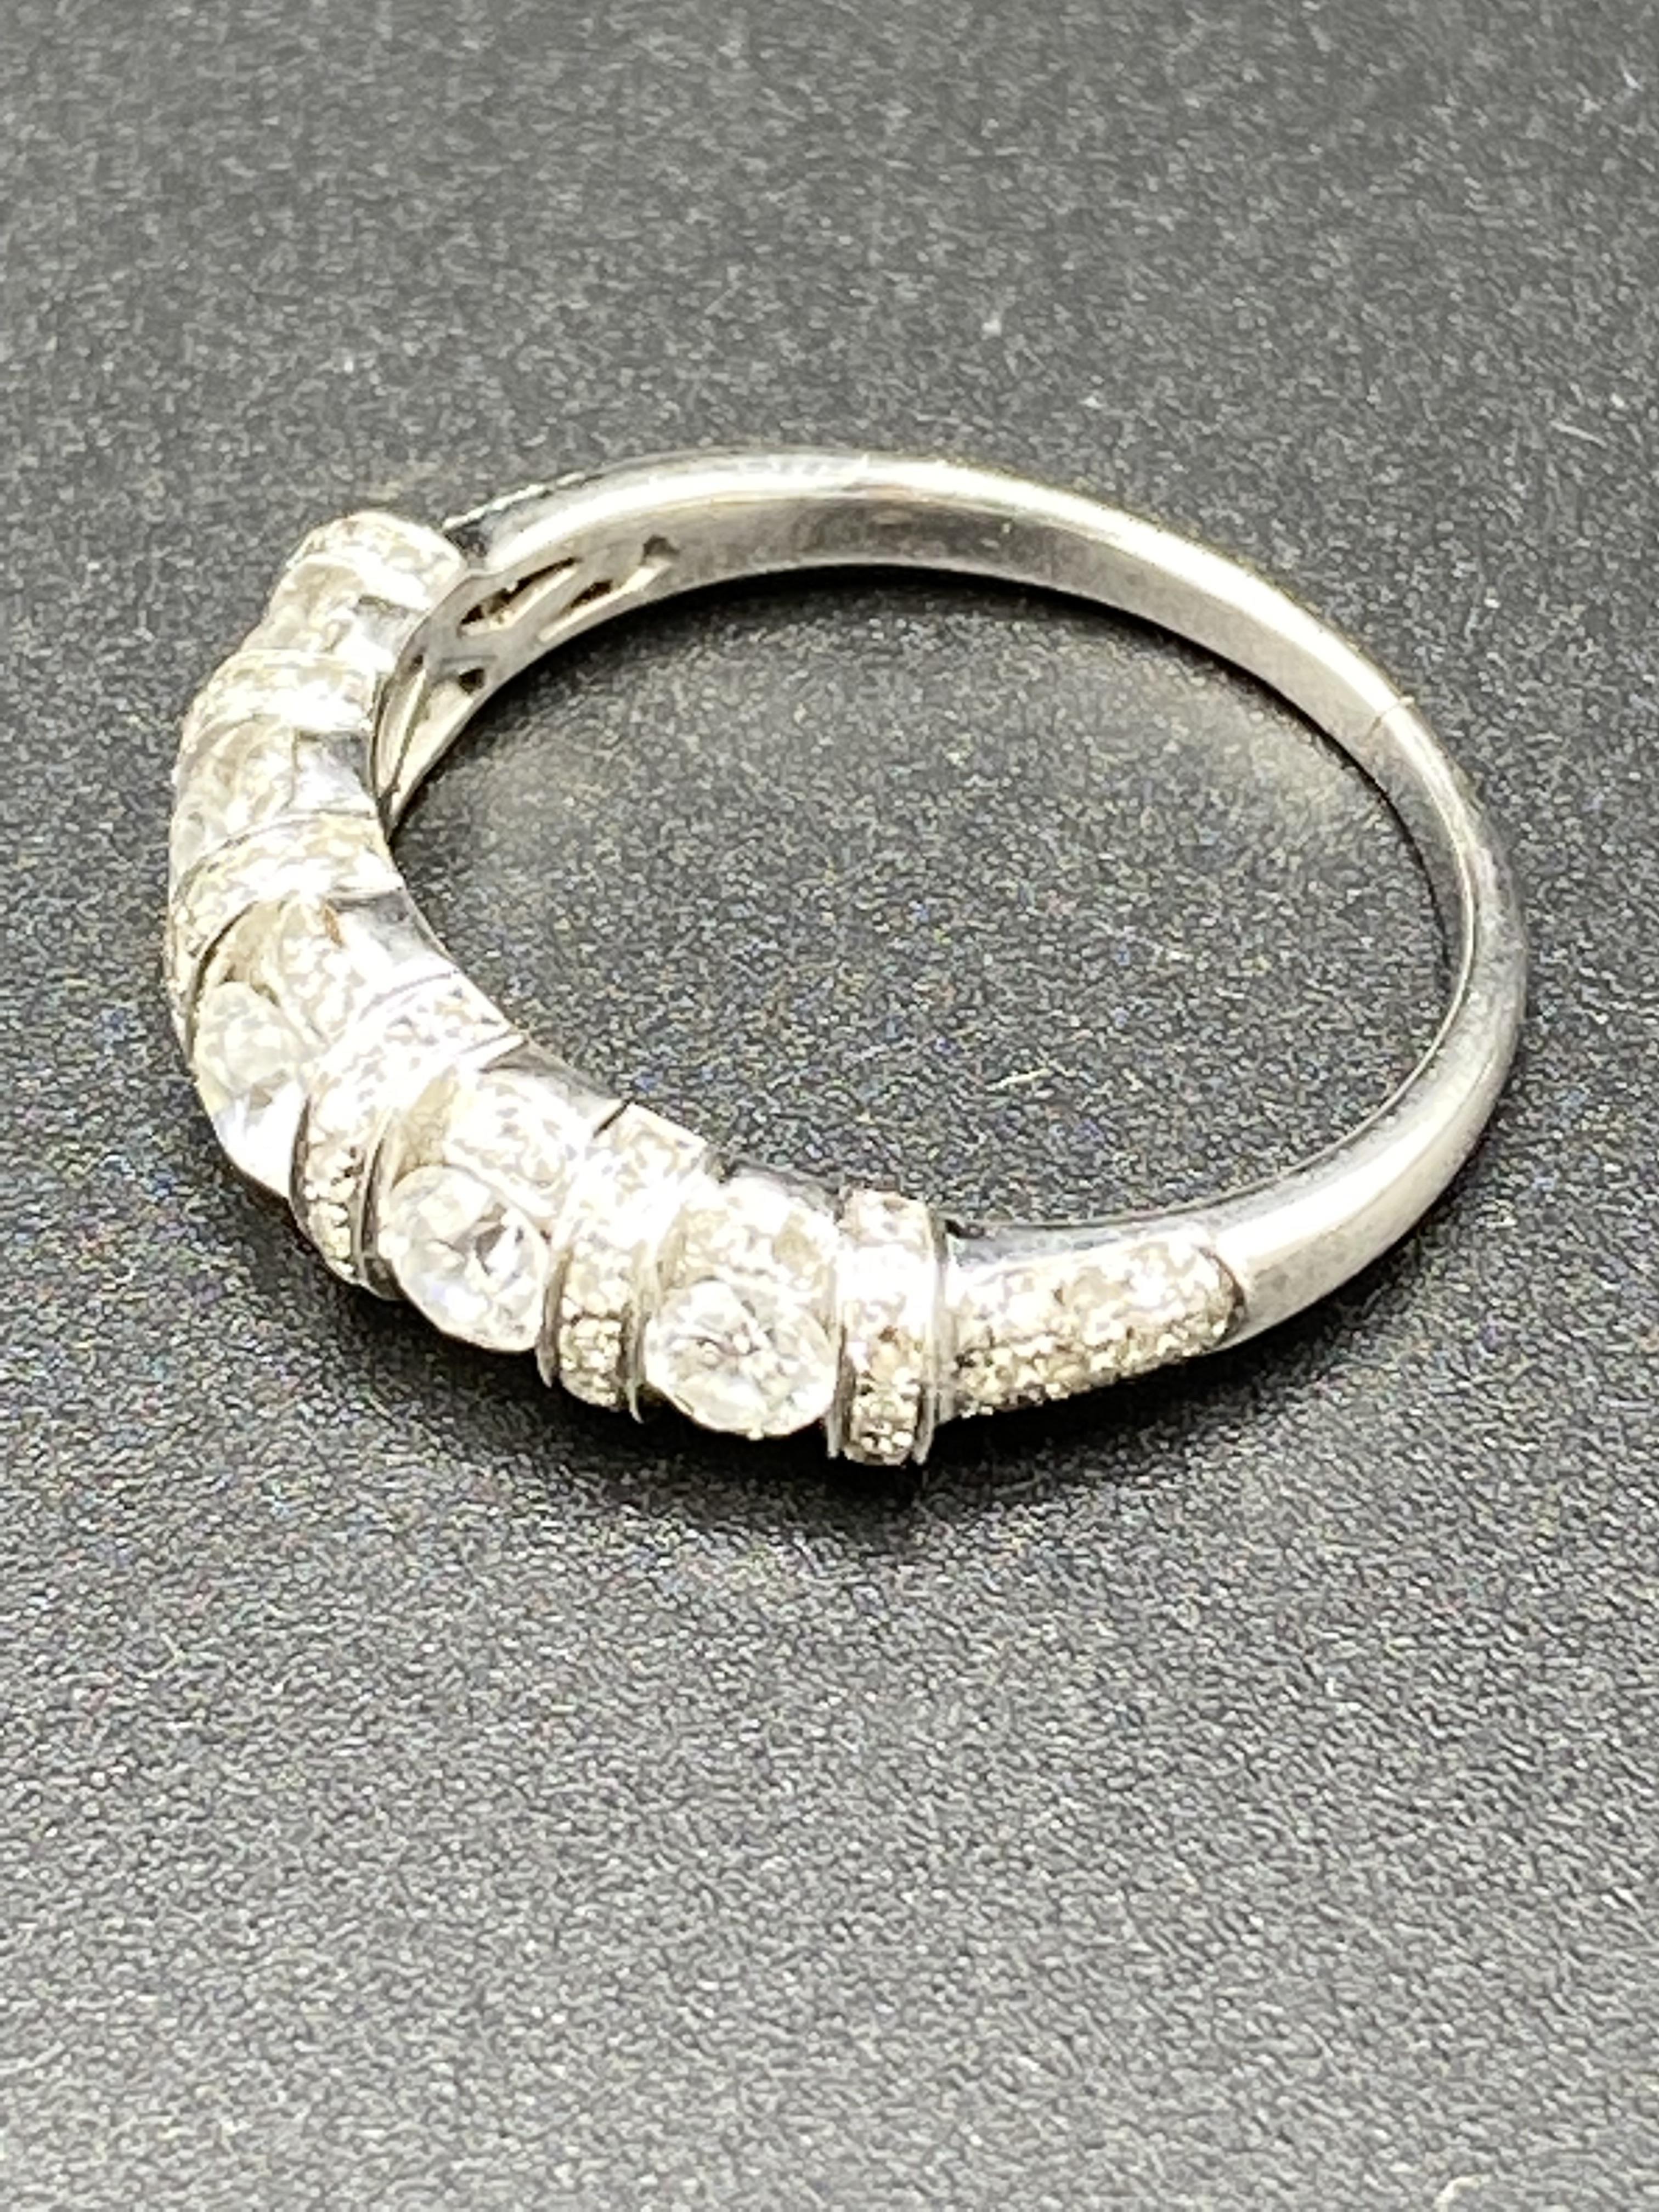 White gold ring set with five diamonds - Image 4 of 5